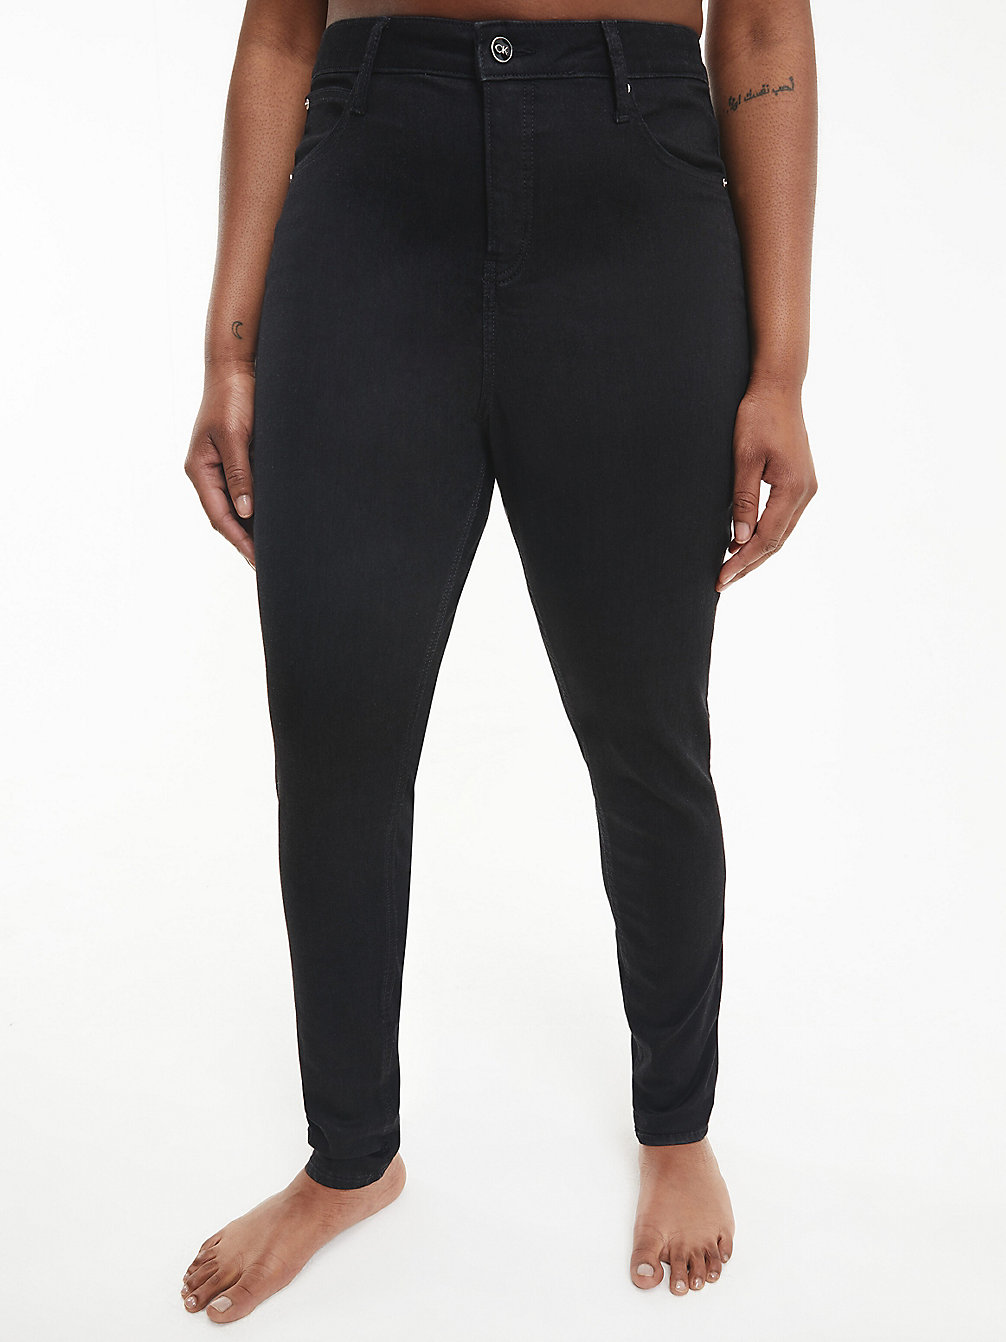 High Rise Skinny Jeans Plus Size > SOFT BLACK > undefined donna > Calvin Klein